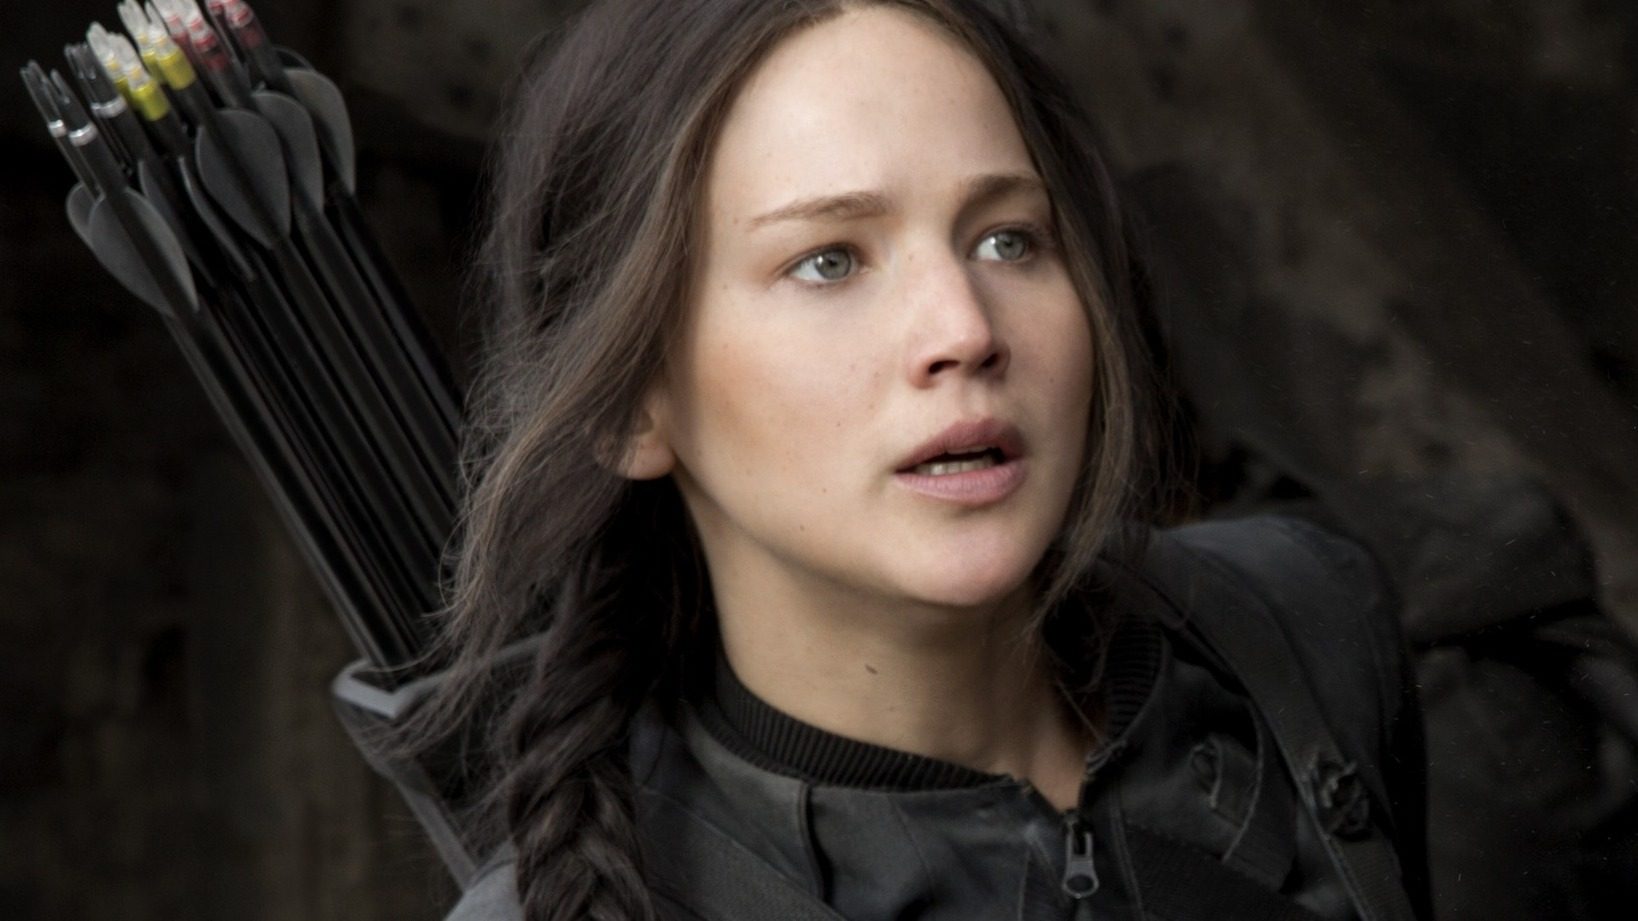 ‘Hunger Games’ prequel film gets official title and release date